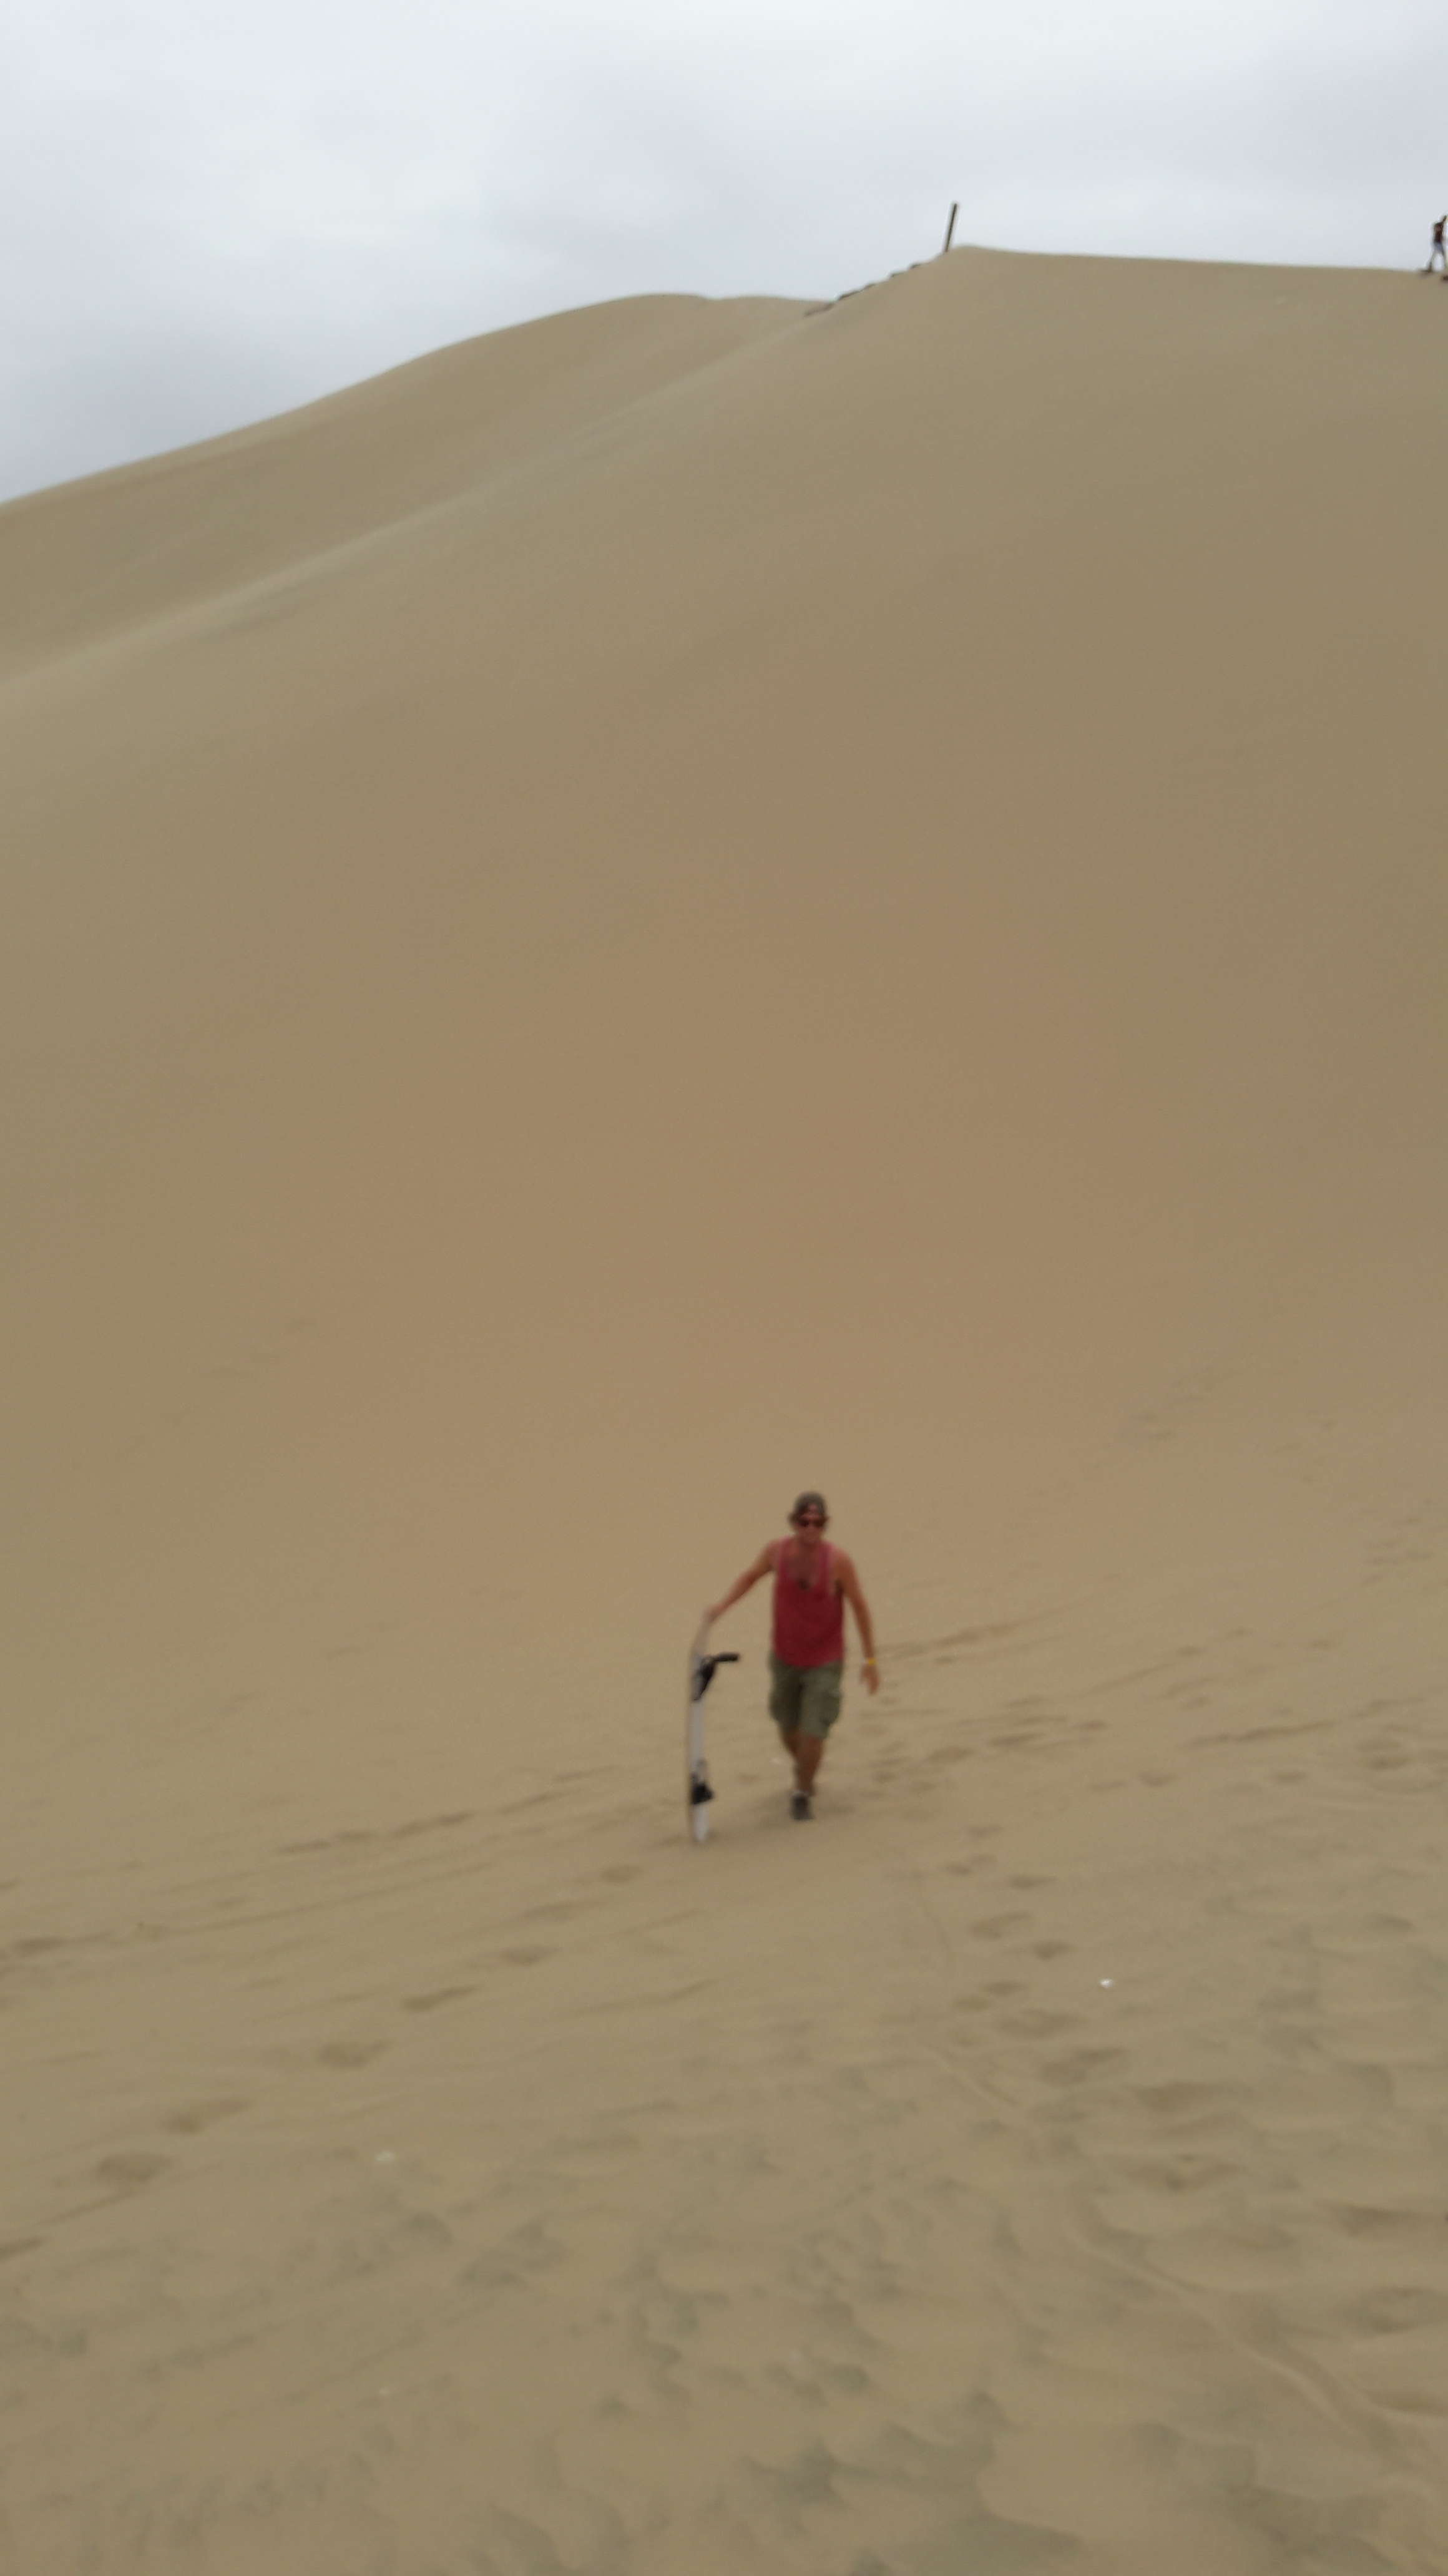 A man Sand boarding in Huacachina